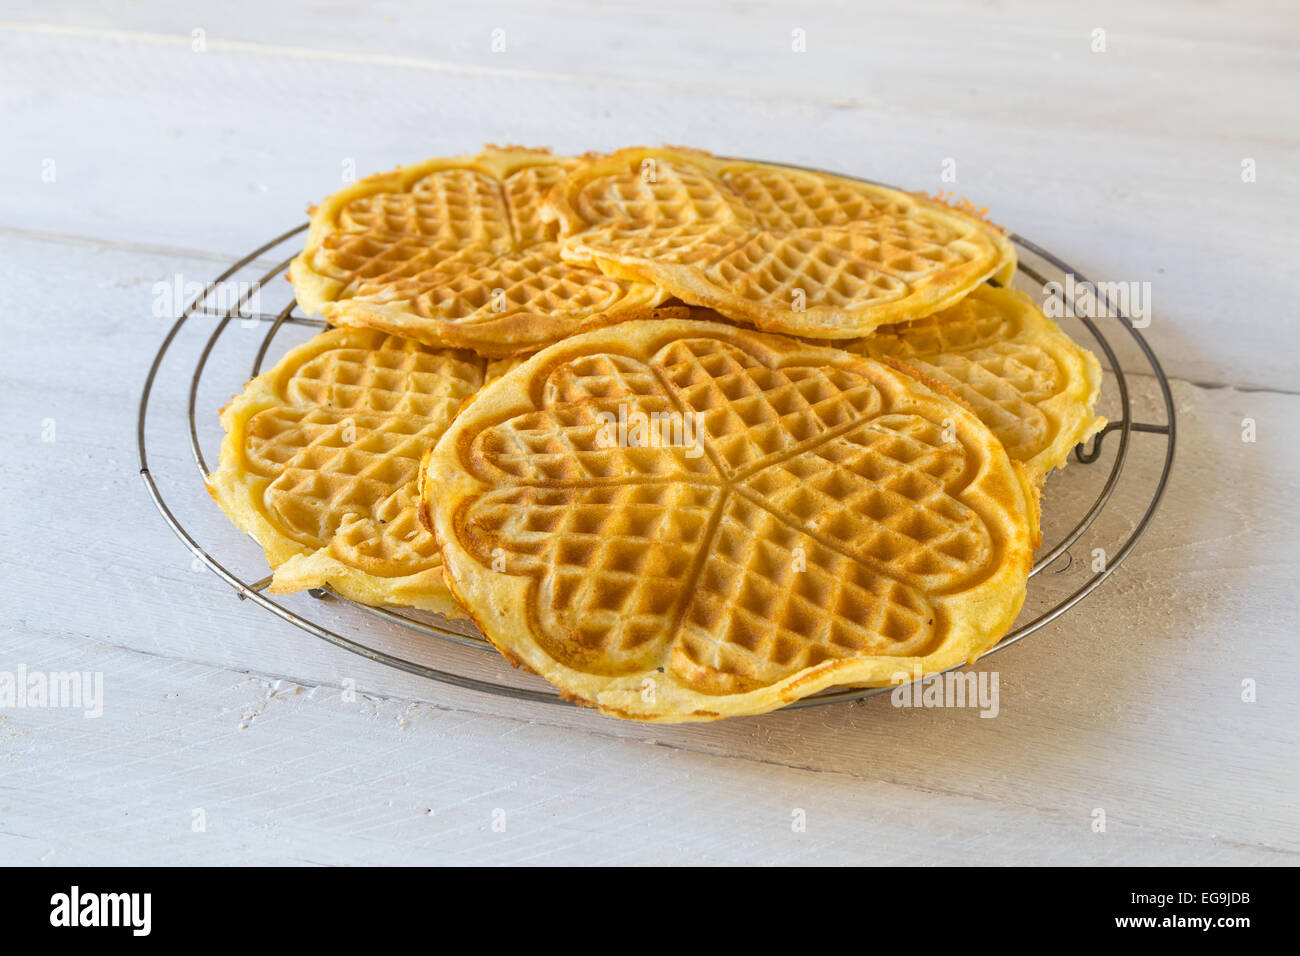 Homemade waffles stored to cool down Stock Photo